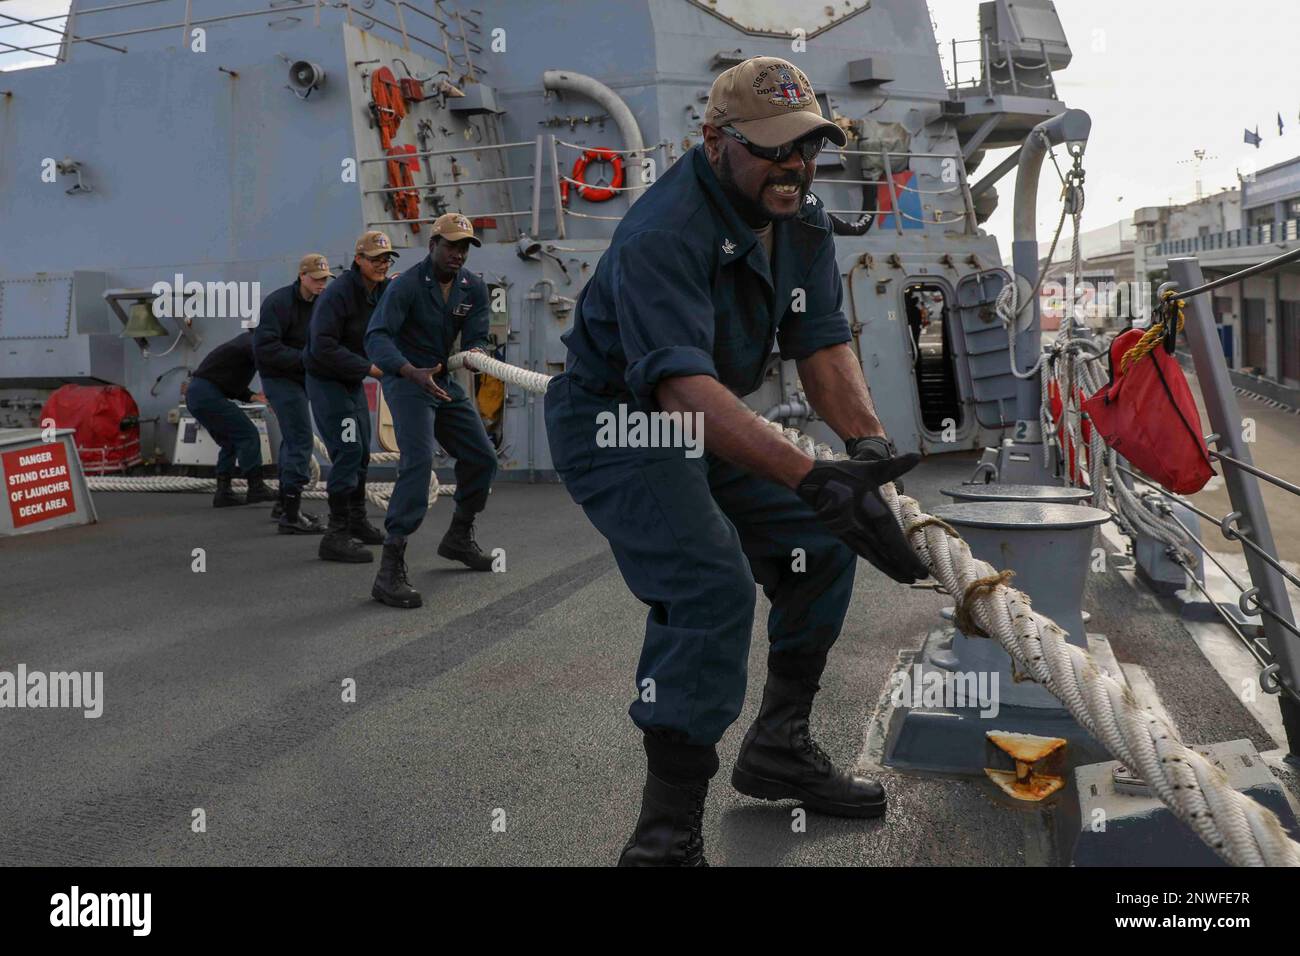 230129-N-JO162-1030 HAIFA, Israel (Jan. 29, 2023) Sailors assigned to the guided-missile destroyer USS Truxtun (DDG 103) heave line aboard as the ship pulls out of Haifa, Israel, Jan. 29, 2023. Truxtun is deployed to the U.S. 5th Fleet area of operations to help ensure maritime security and stability in the Middle East region. Stock Photo